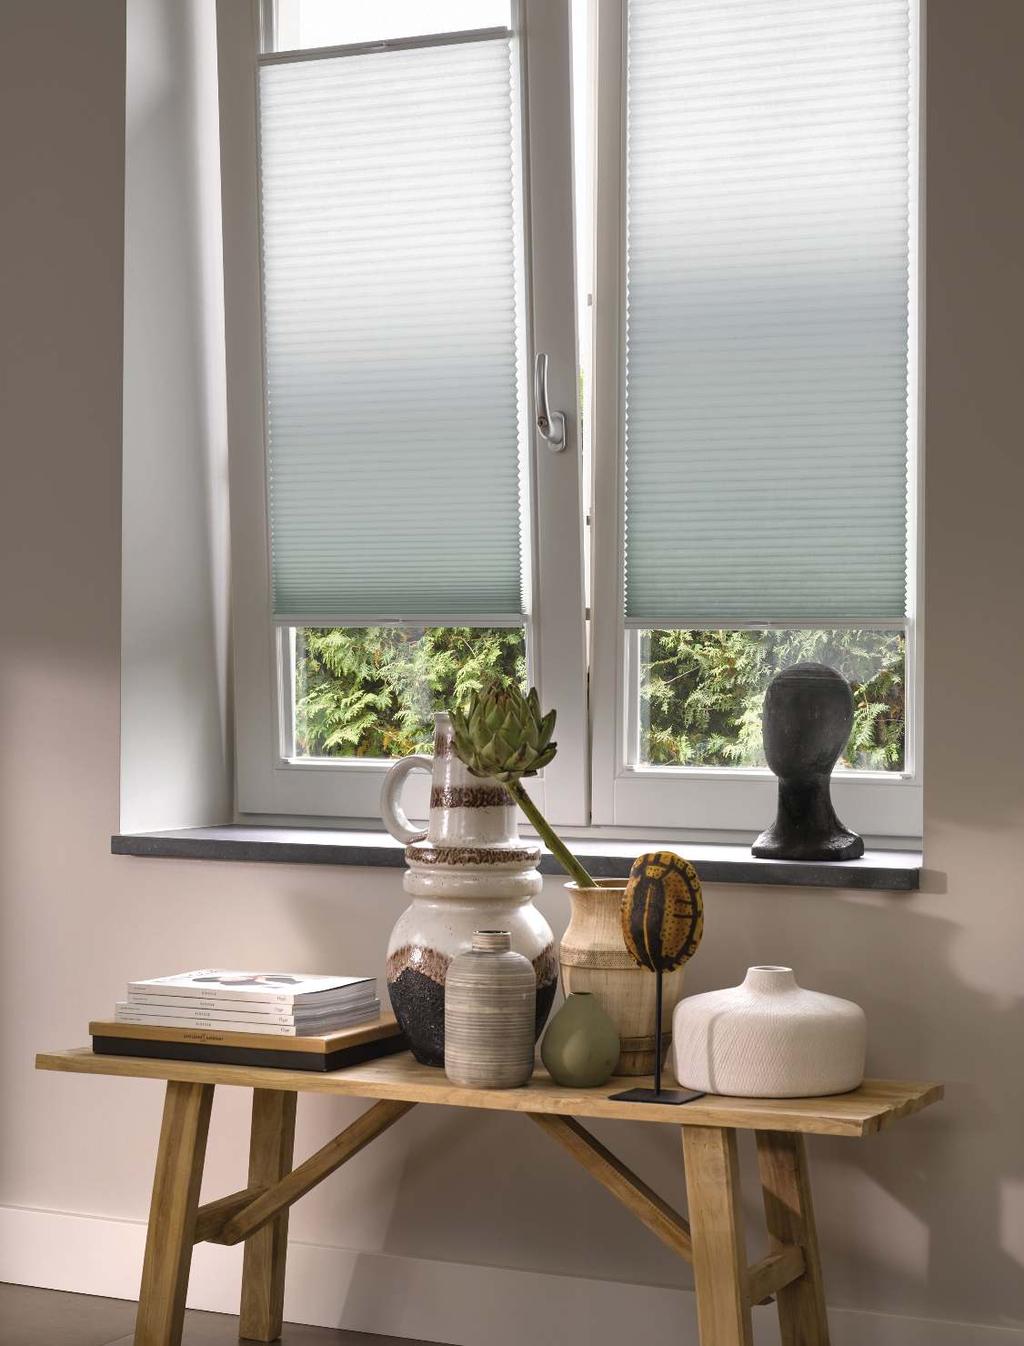 Plus, the compact design of Duette Shades can fit almost every type of window and shape from the smallest